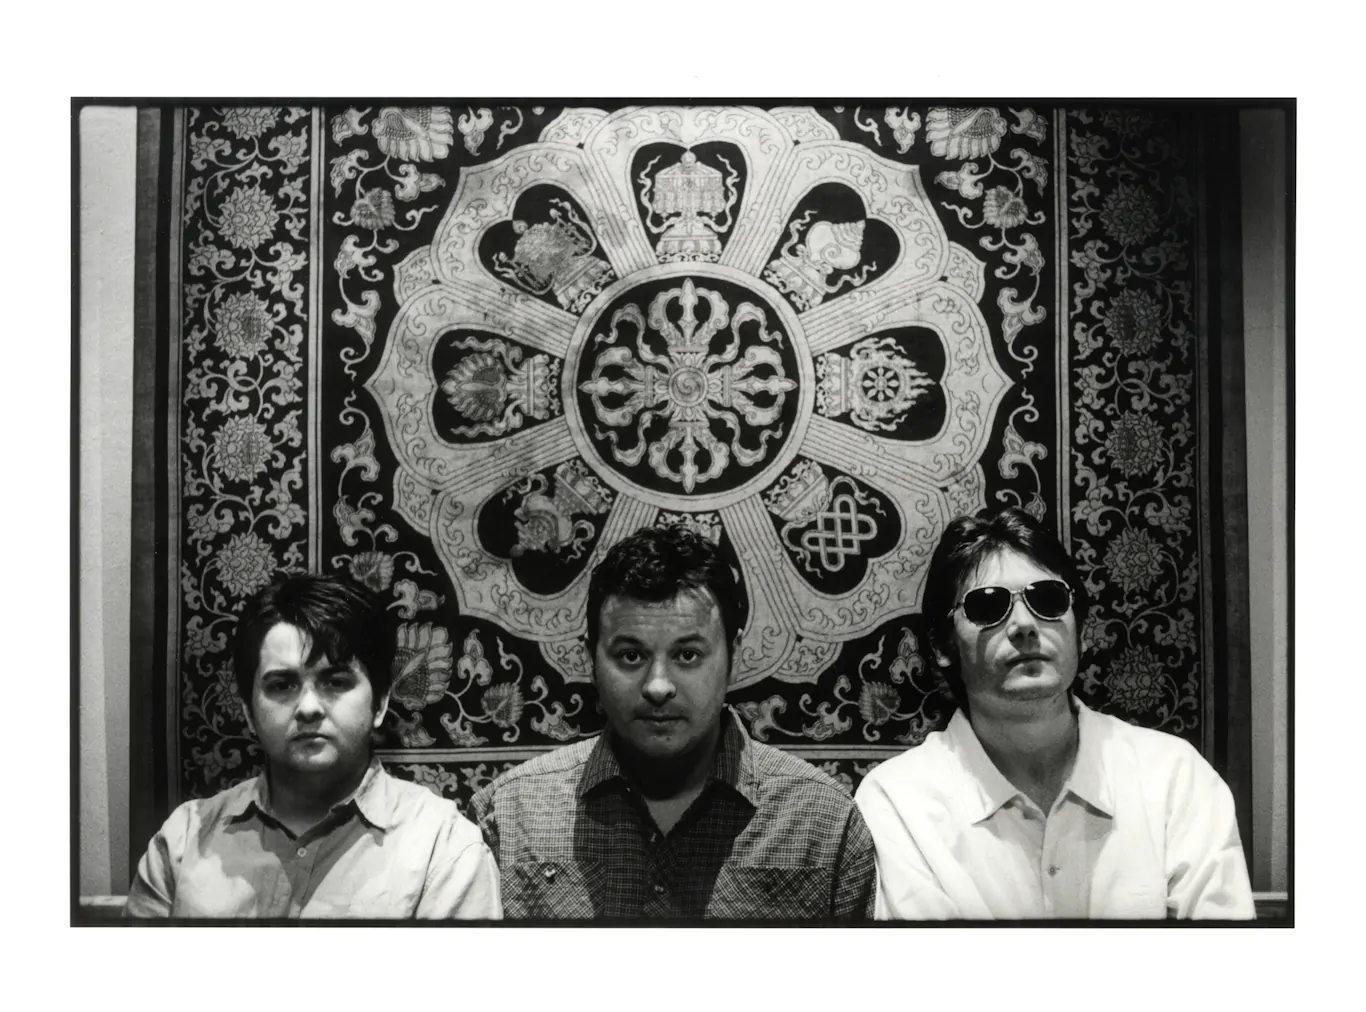 MANIC STREET PREACHERS announce ‘Know Your Enemy’ (Expanded & Remastered) & Share previously unheard single ‘Rosebud’